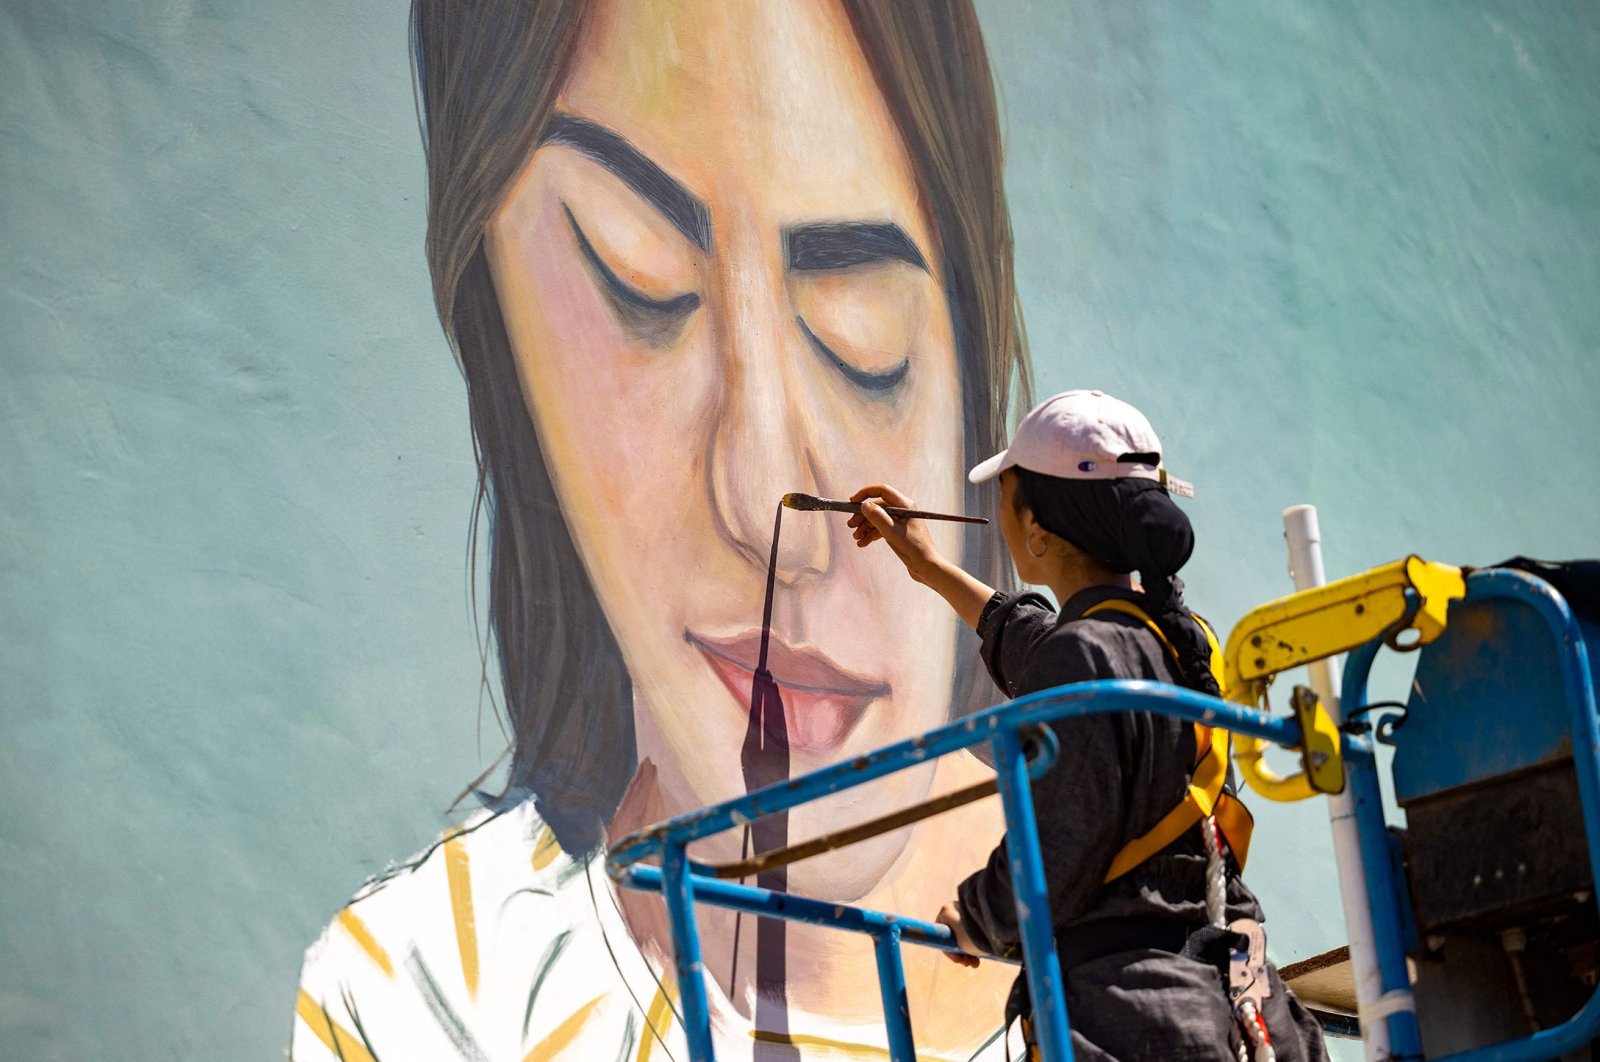 Moroccan street artist Imane Droby works on a mural during the Jidar street art festival in the capital Rabat, Morocco, Sept. 20, 2021. (AFP Photo)